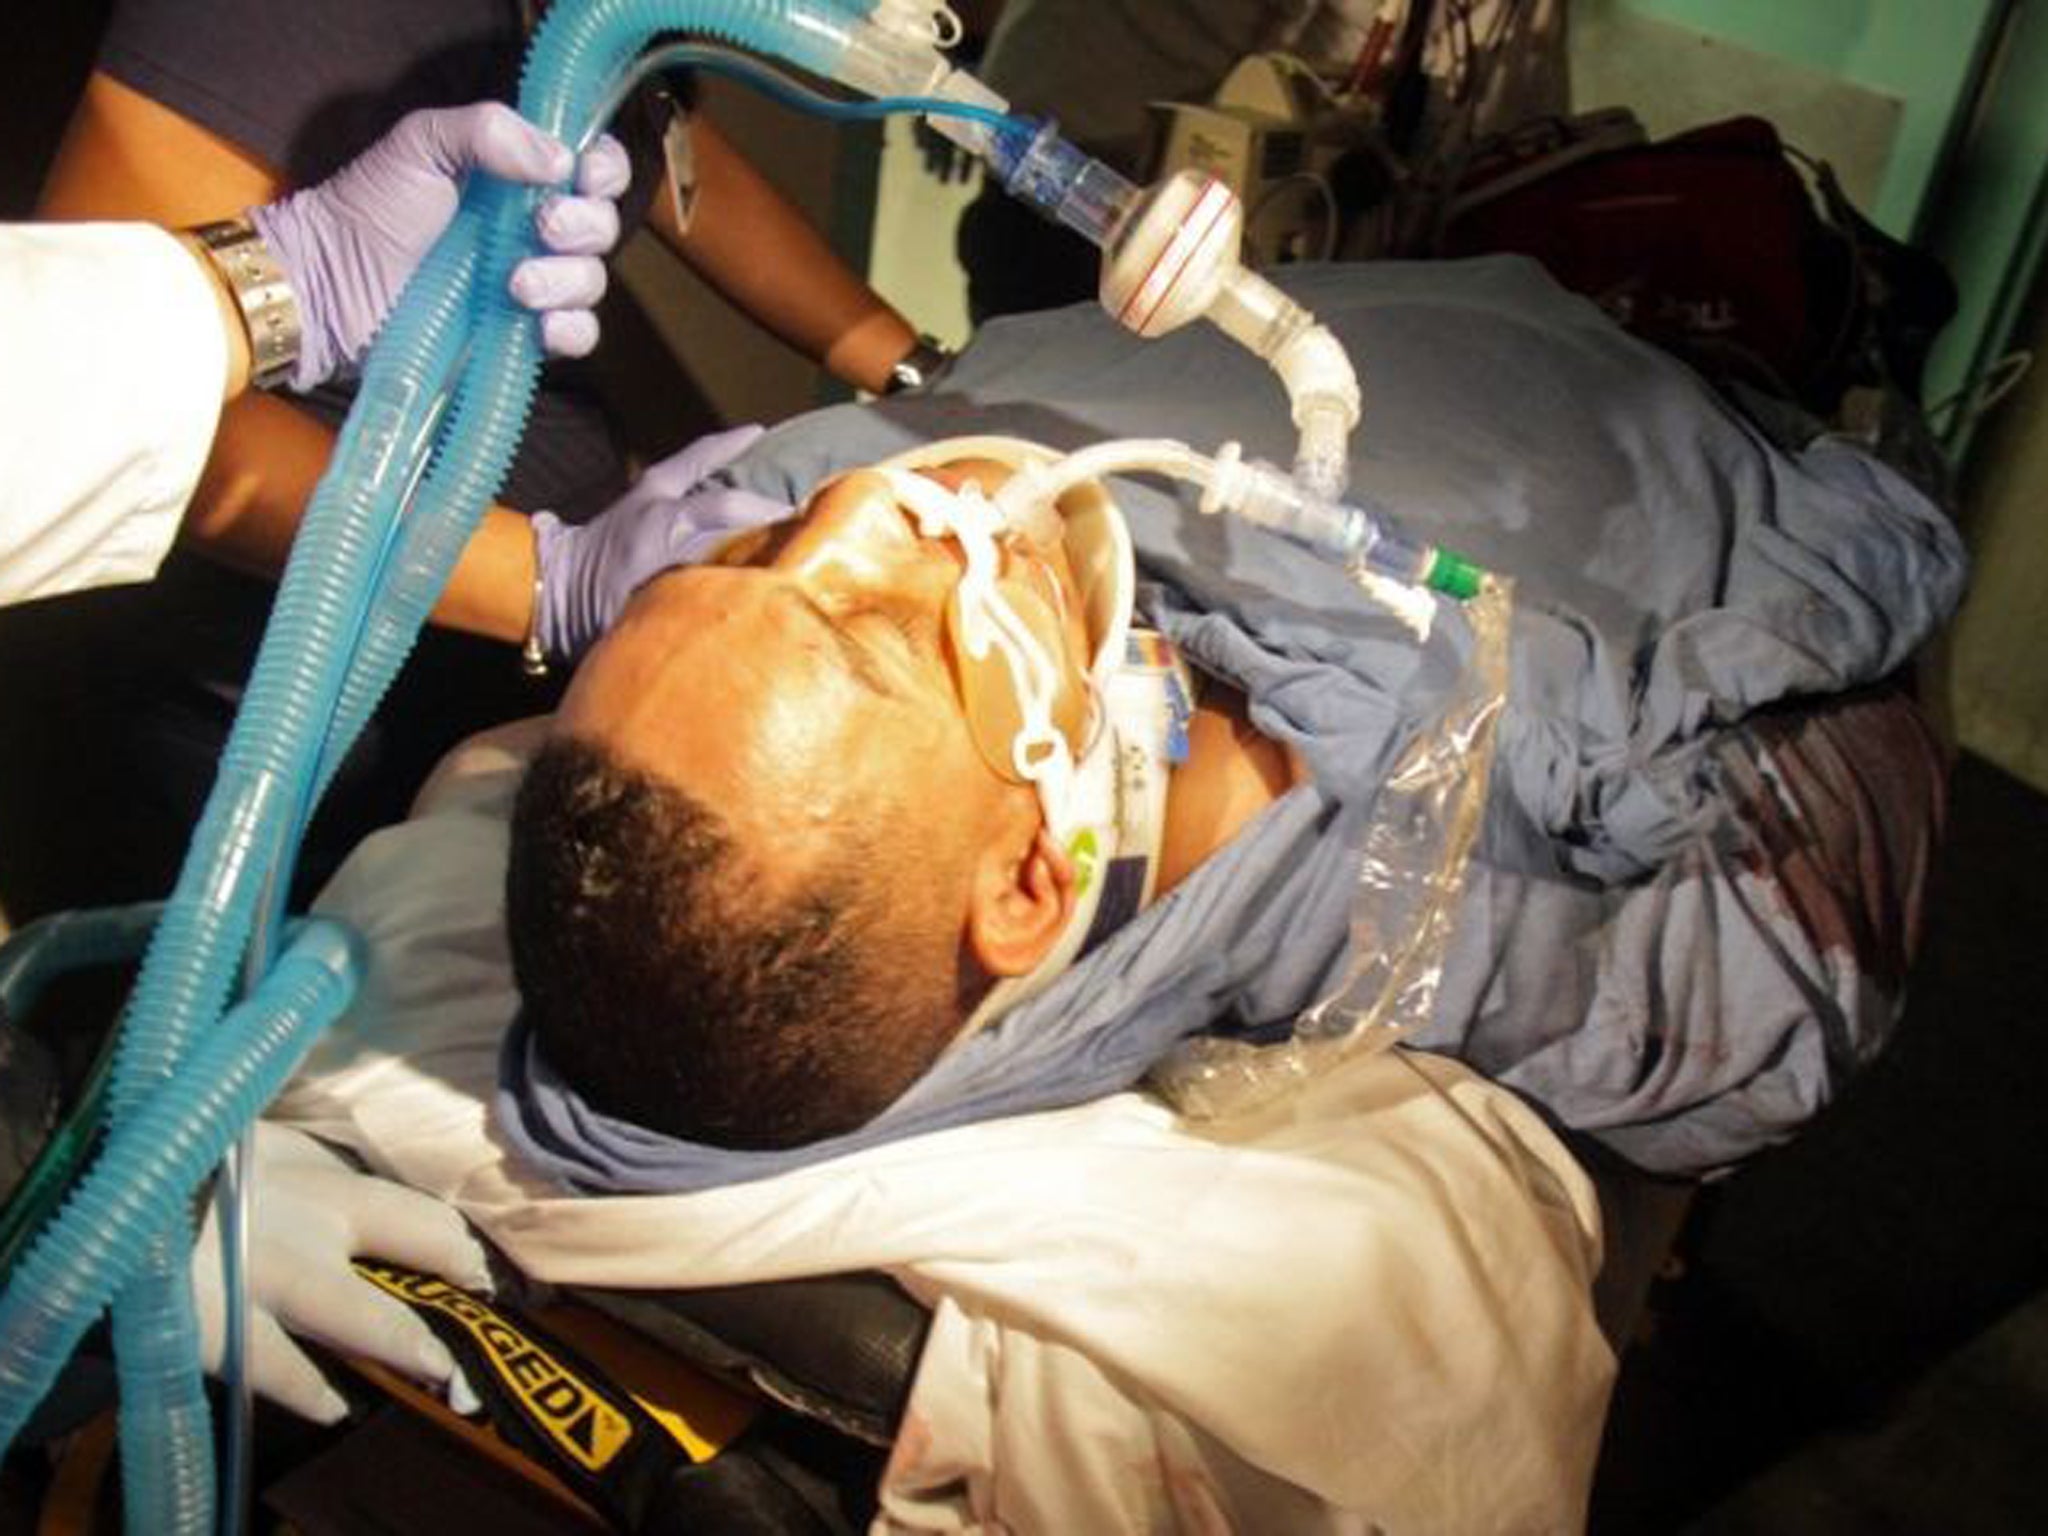 Camacho was rushed to Centro Medico, the trauma center in San Juan,